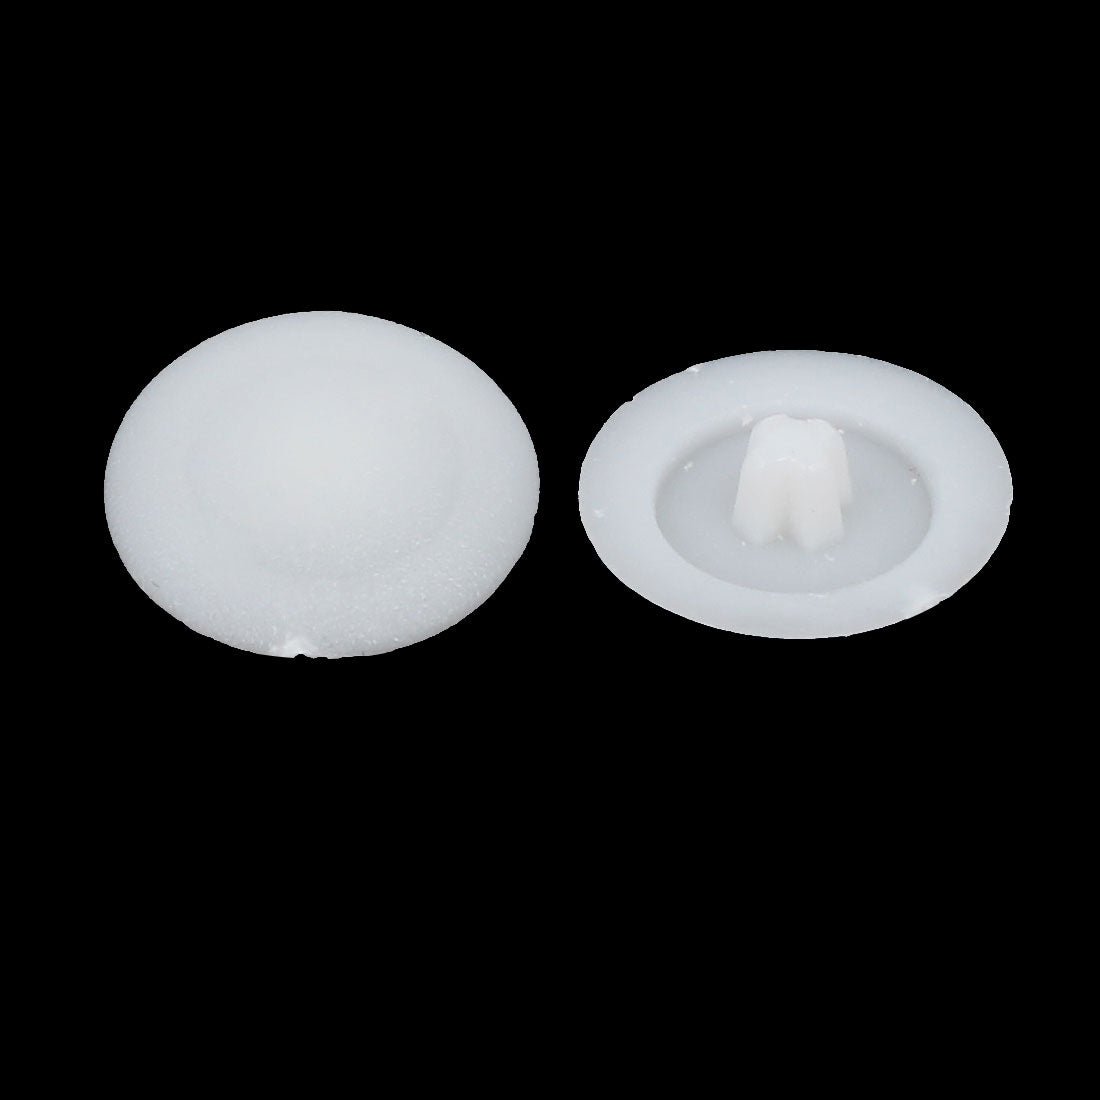 uxcell Uxcell 12mm Dia Plastic Phillips Screw Cap Hole Plugs Dust Proof Covers White 100pcs